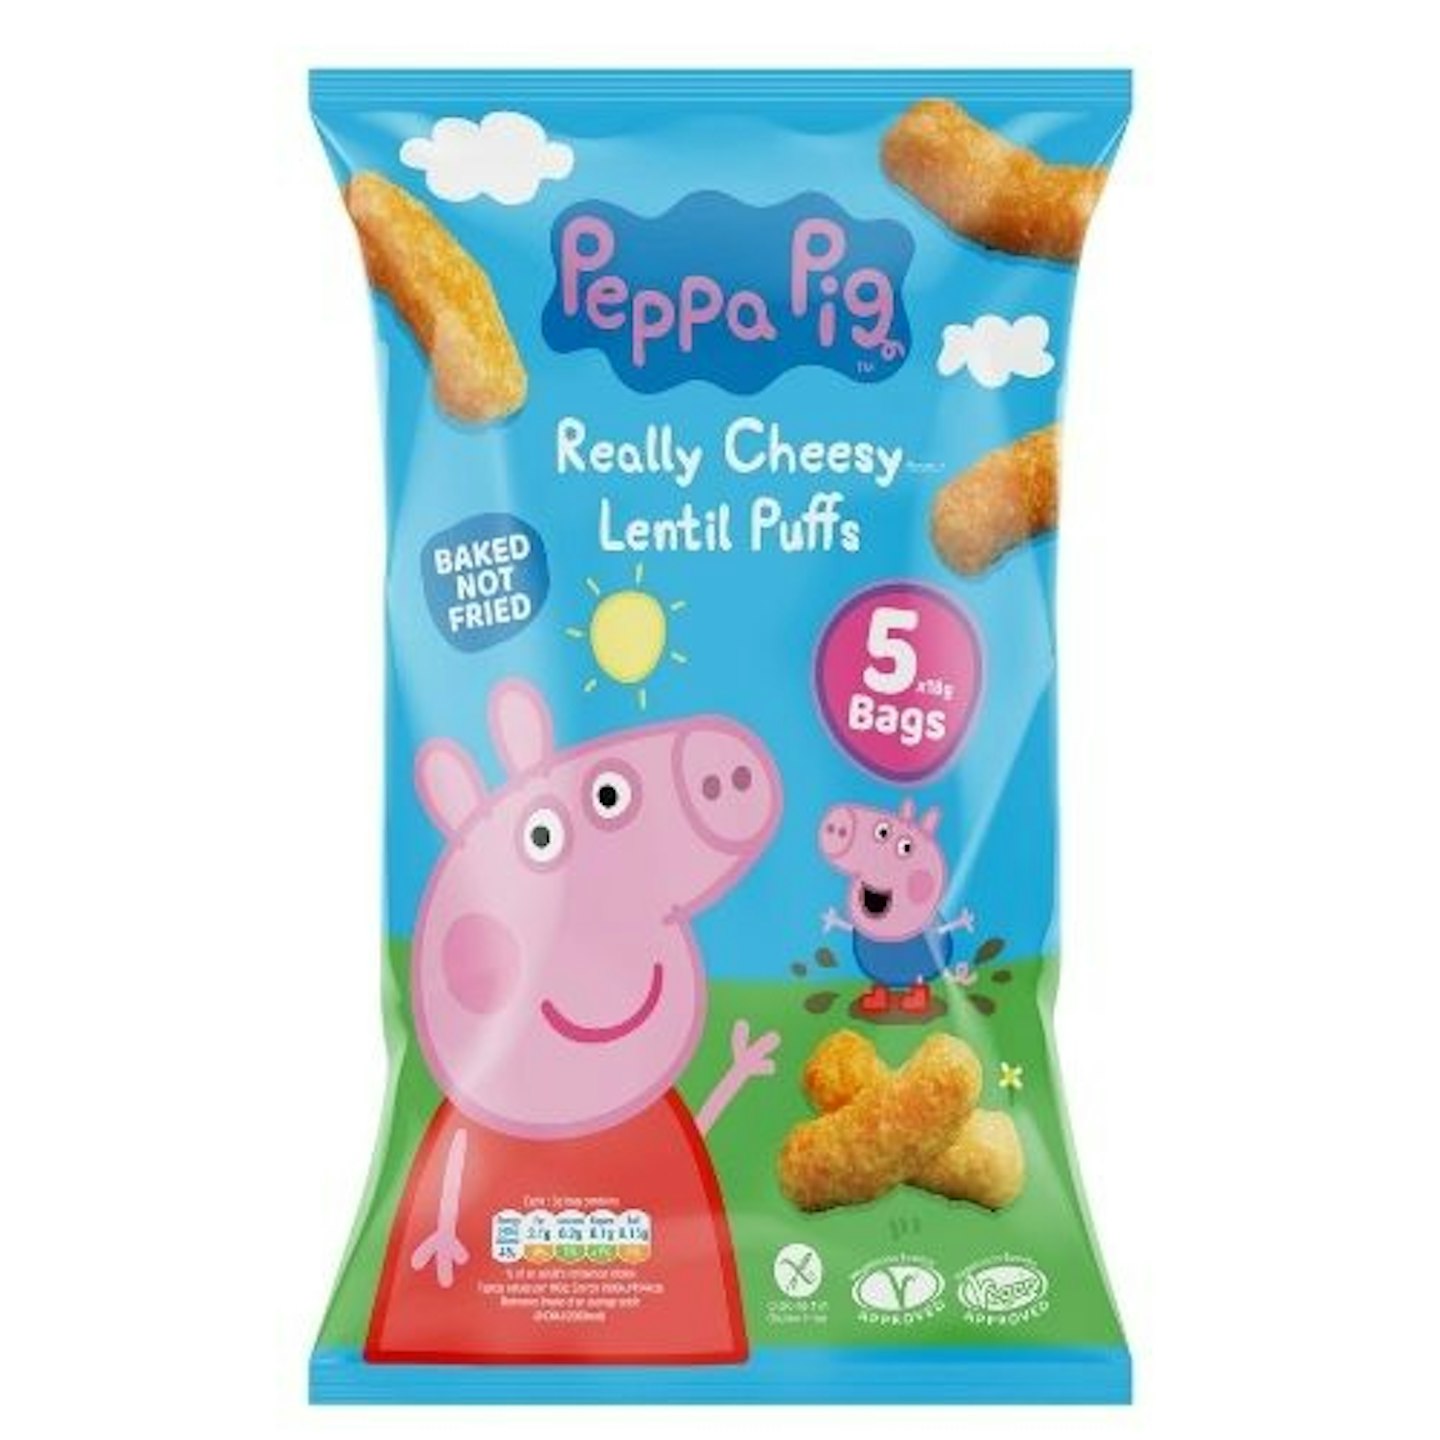 Peppa Pig Really Cheesy Flavour Lentil Puffs